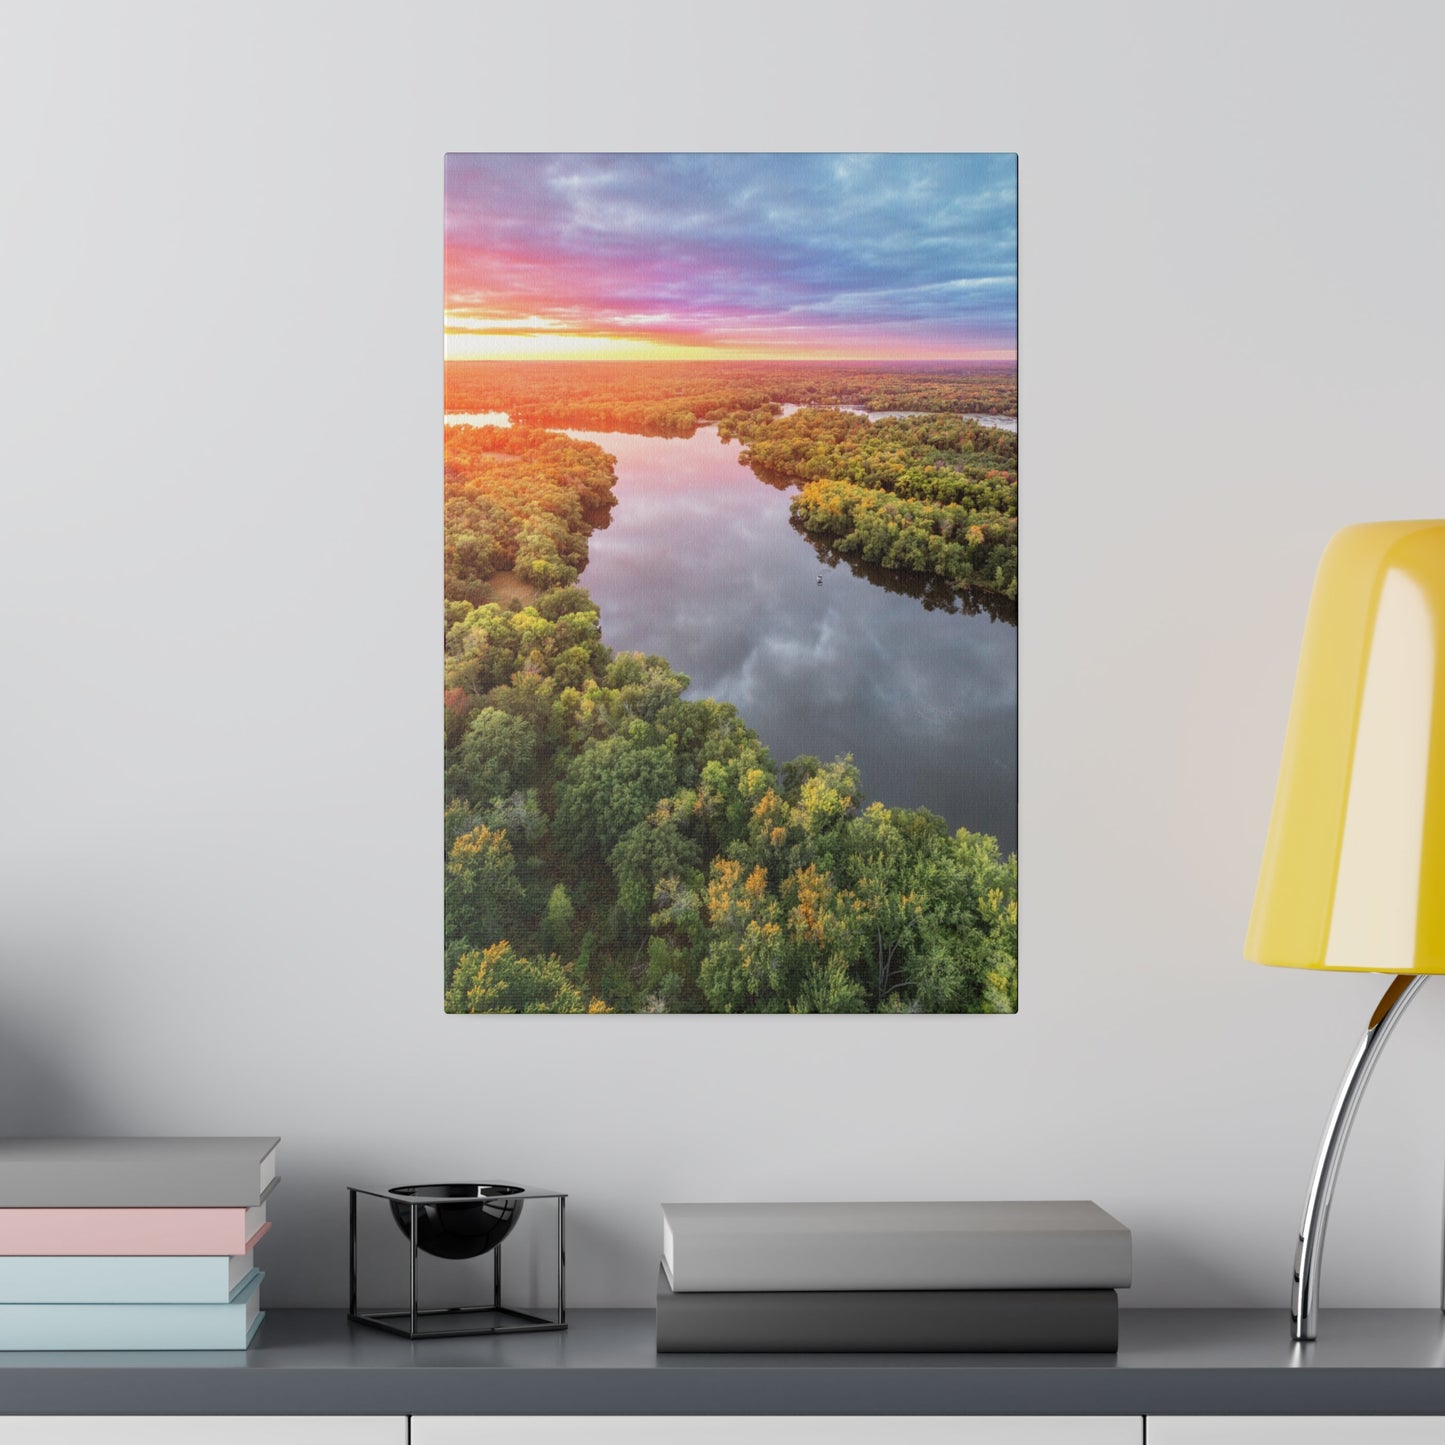 Wisconsin River Sunset by Daniel Acker (canvas print, multiple sizes)